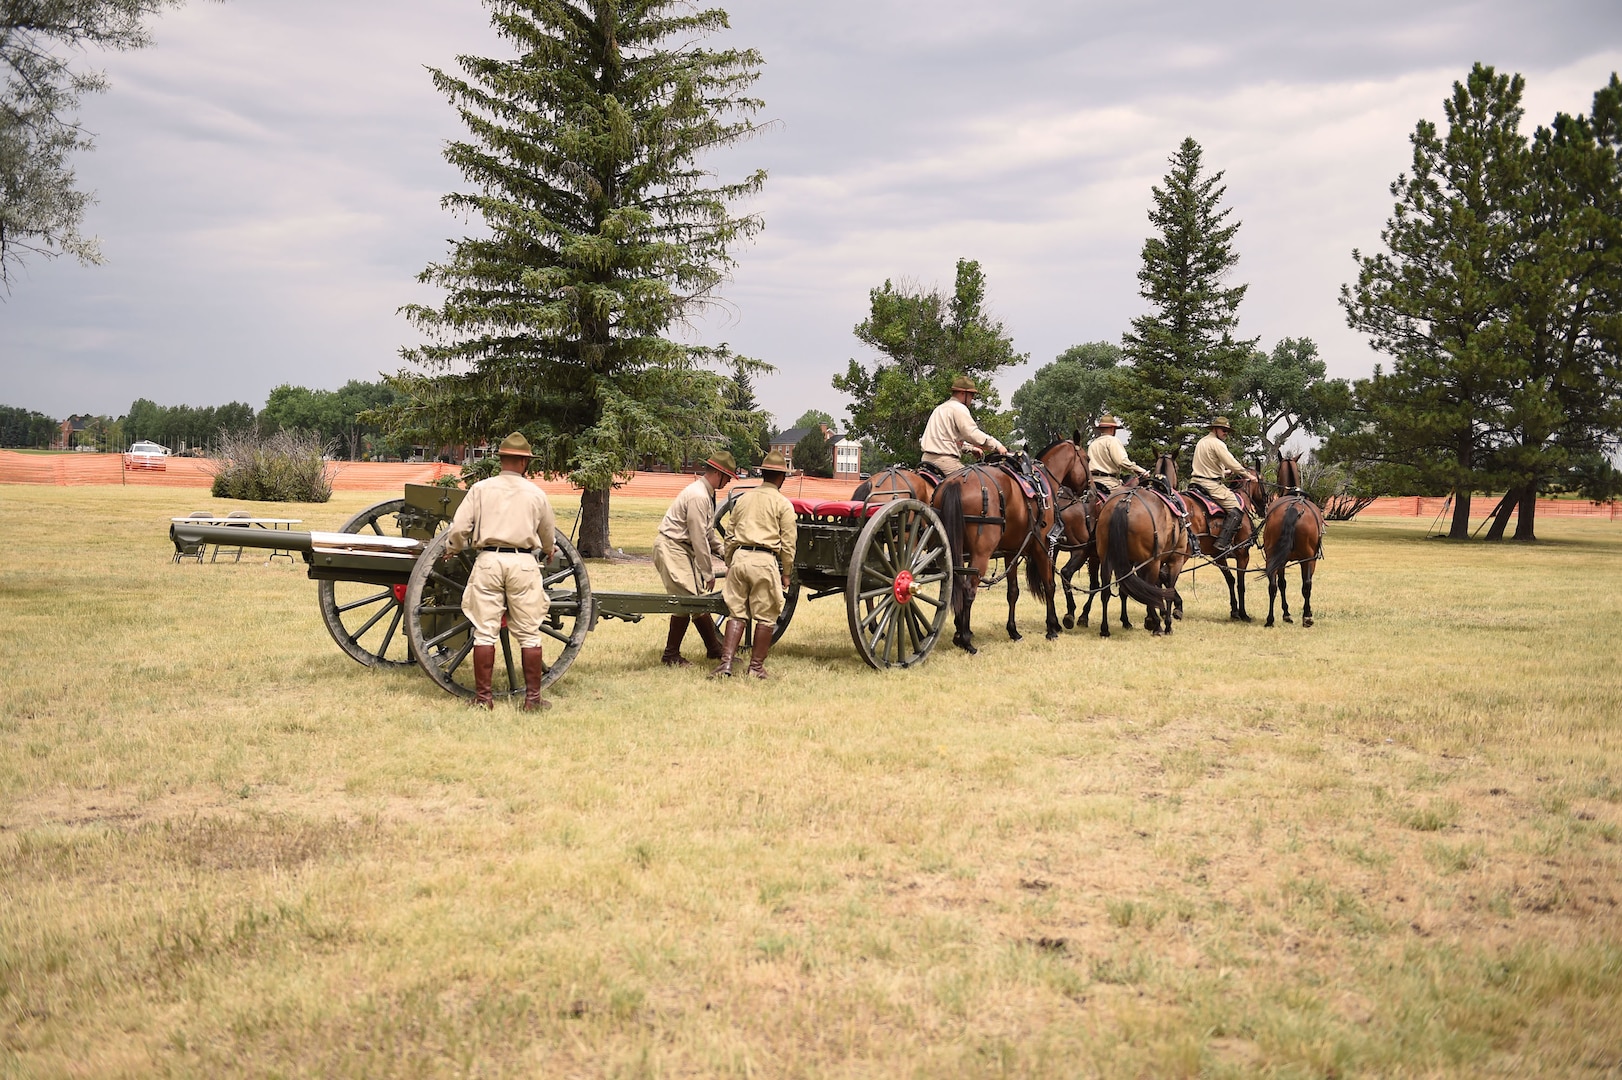 The Fort Sill (Oklahoma) Field Artillery Half Section, visited Cheyenne July 20-22, 2018, to help kick off Cheyenne Frontier Days and to demonstrate how artillerymen operated 100 years ago. The Wyoming Military Department hosted the team which performed at the opening day wild west show, a parade, a rodeo, and at F.E. Warren Air Force Base’s Fort D.A. Russell Days.